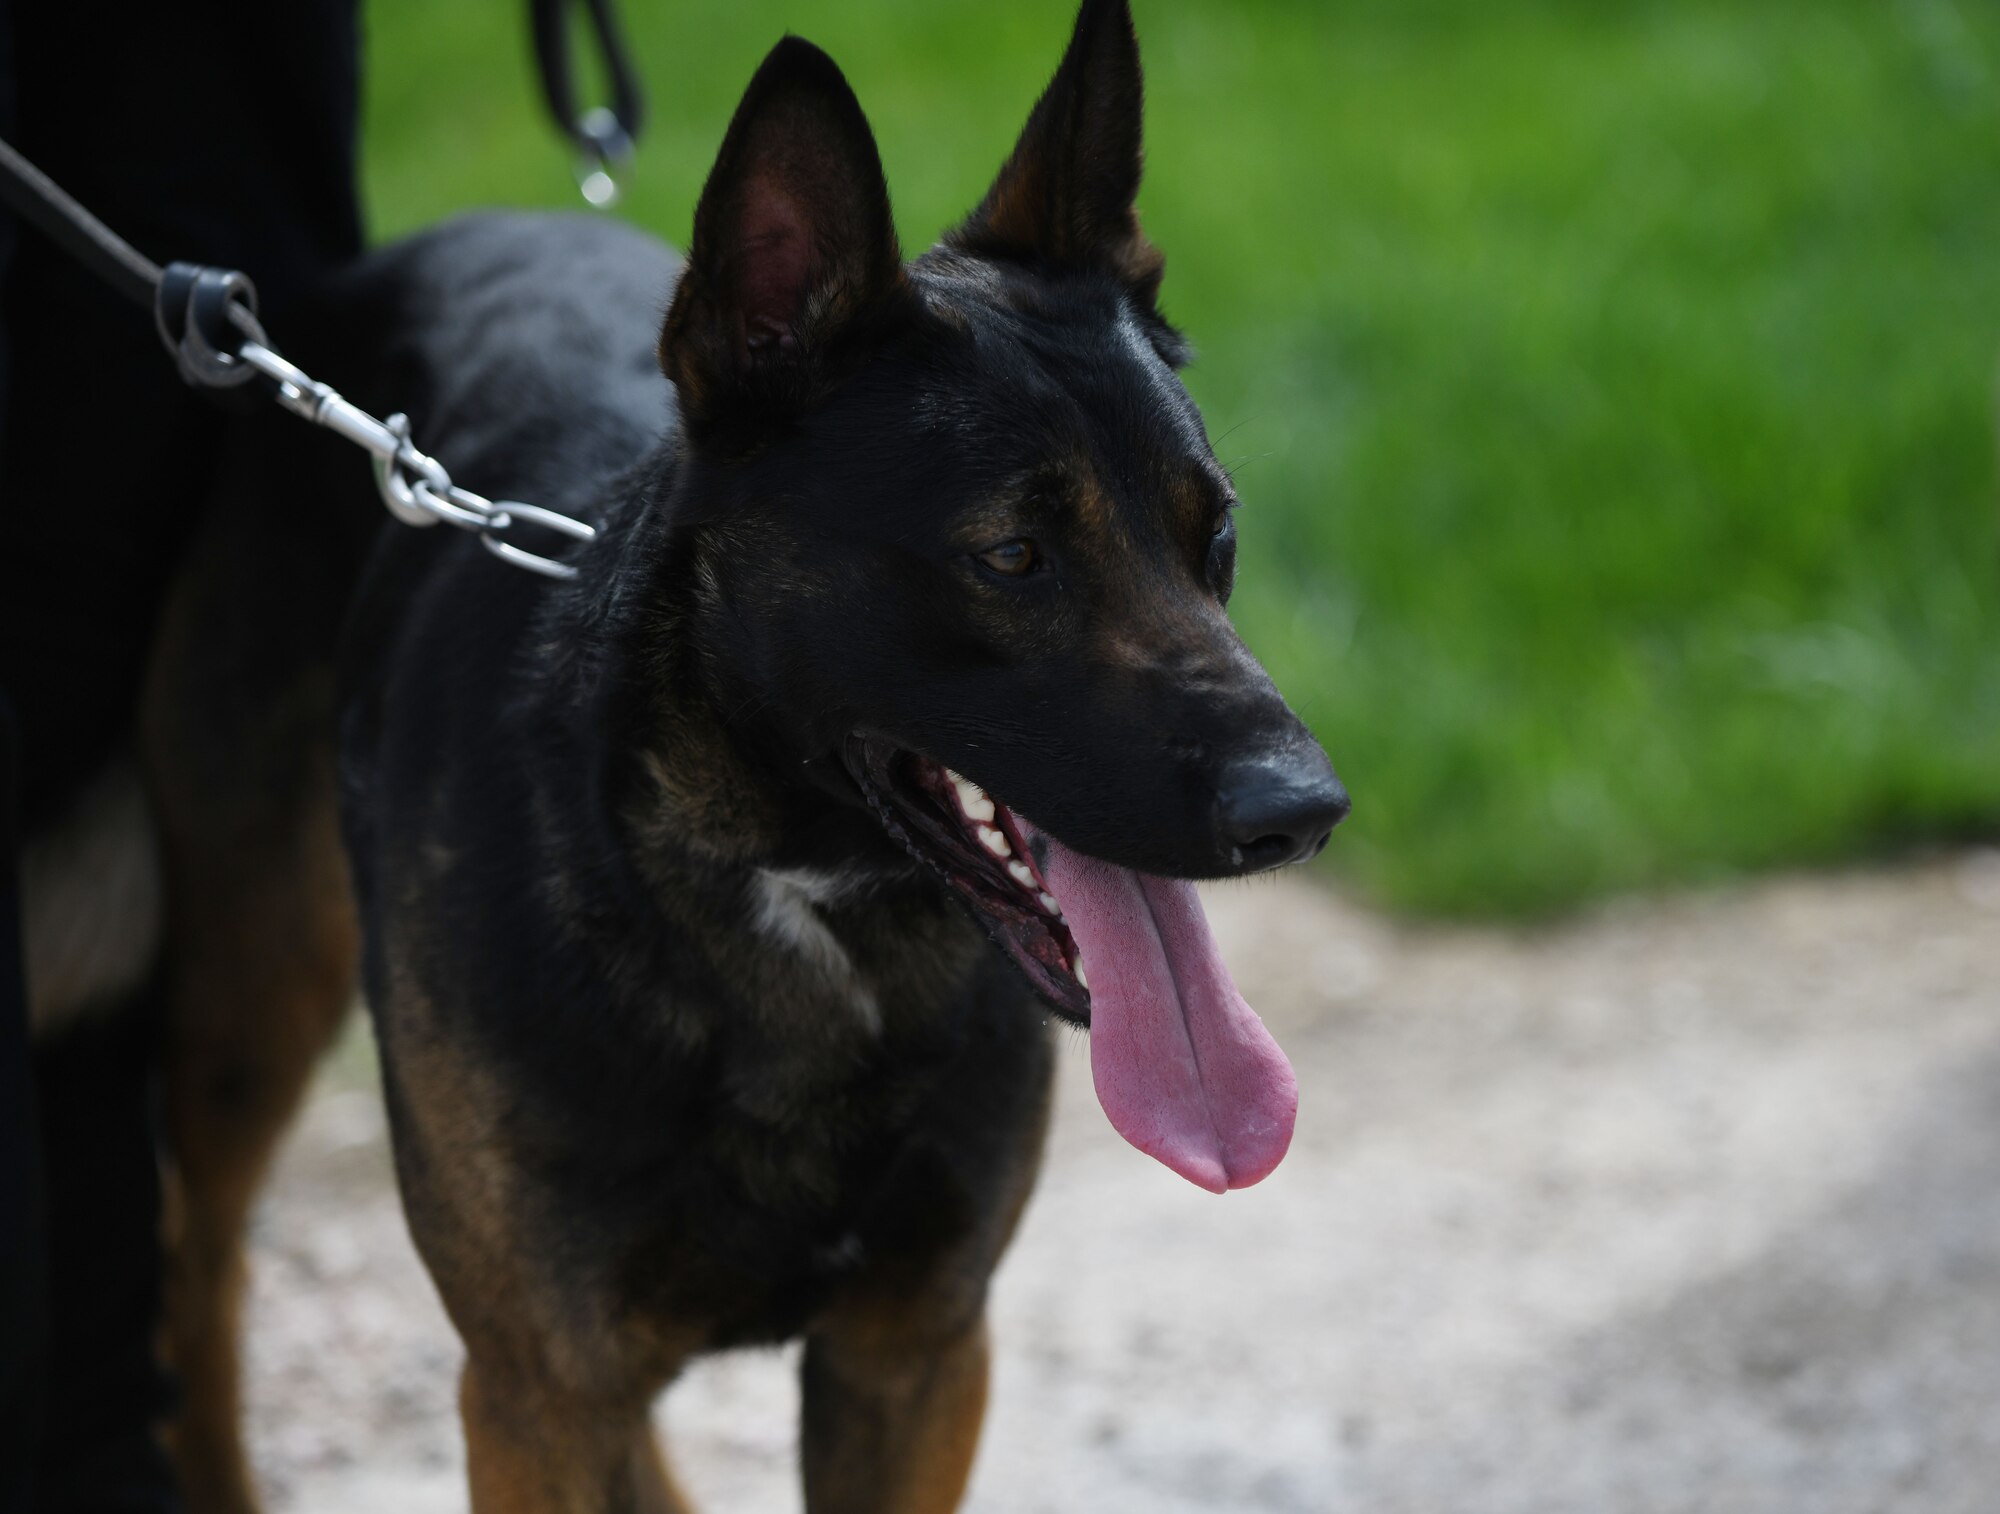 Sem, a South Dakota Highway Patrol police K-9, waits to compete in the 28th Security Forces Squadron military working dog competition held in honor of National Police Week at the K-9 obedience course on Ellsworth Air Force Base, S.D., May 16, 2019. National Police week is held in observance of law enforcement officers who have died in the line of duty while protecting communities nationwide. (U.S. Air Force photo by Airman 1st Class Christina Bennett)